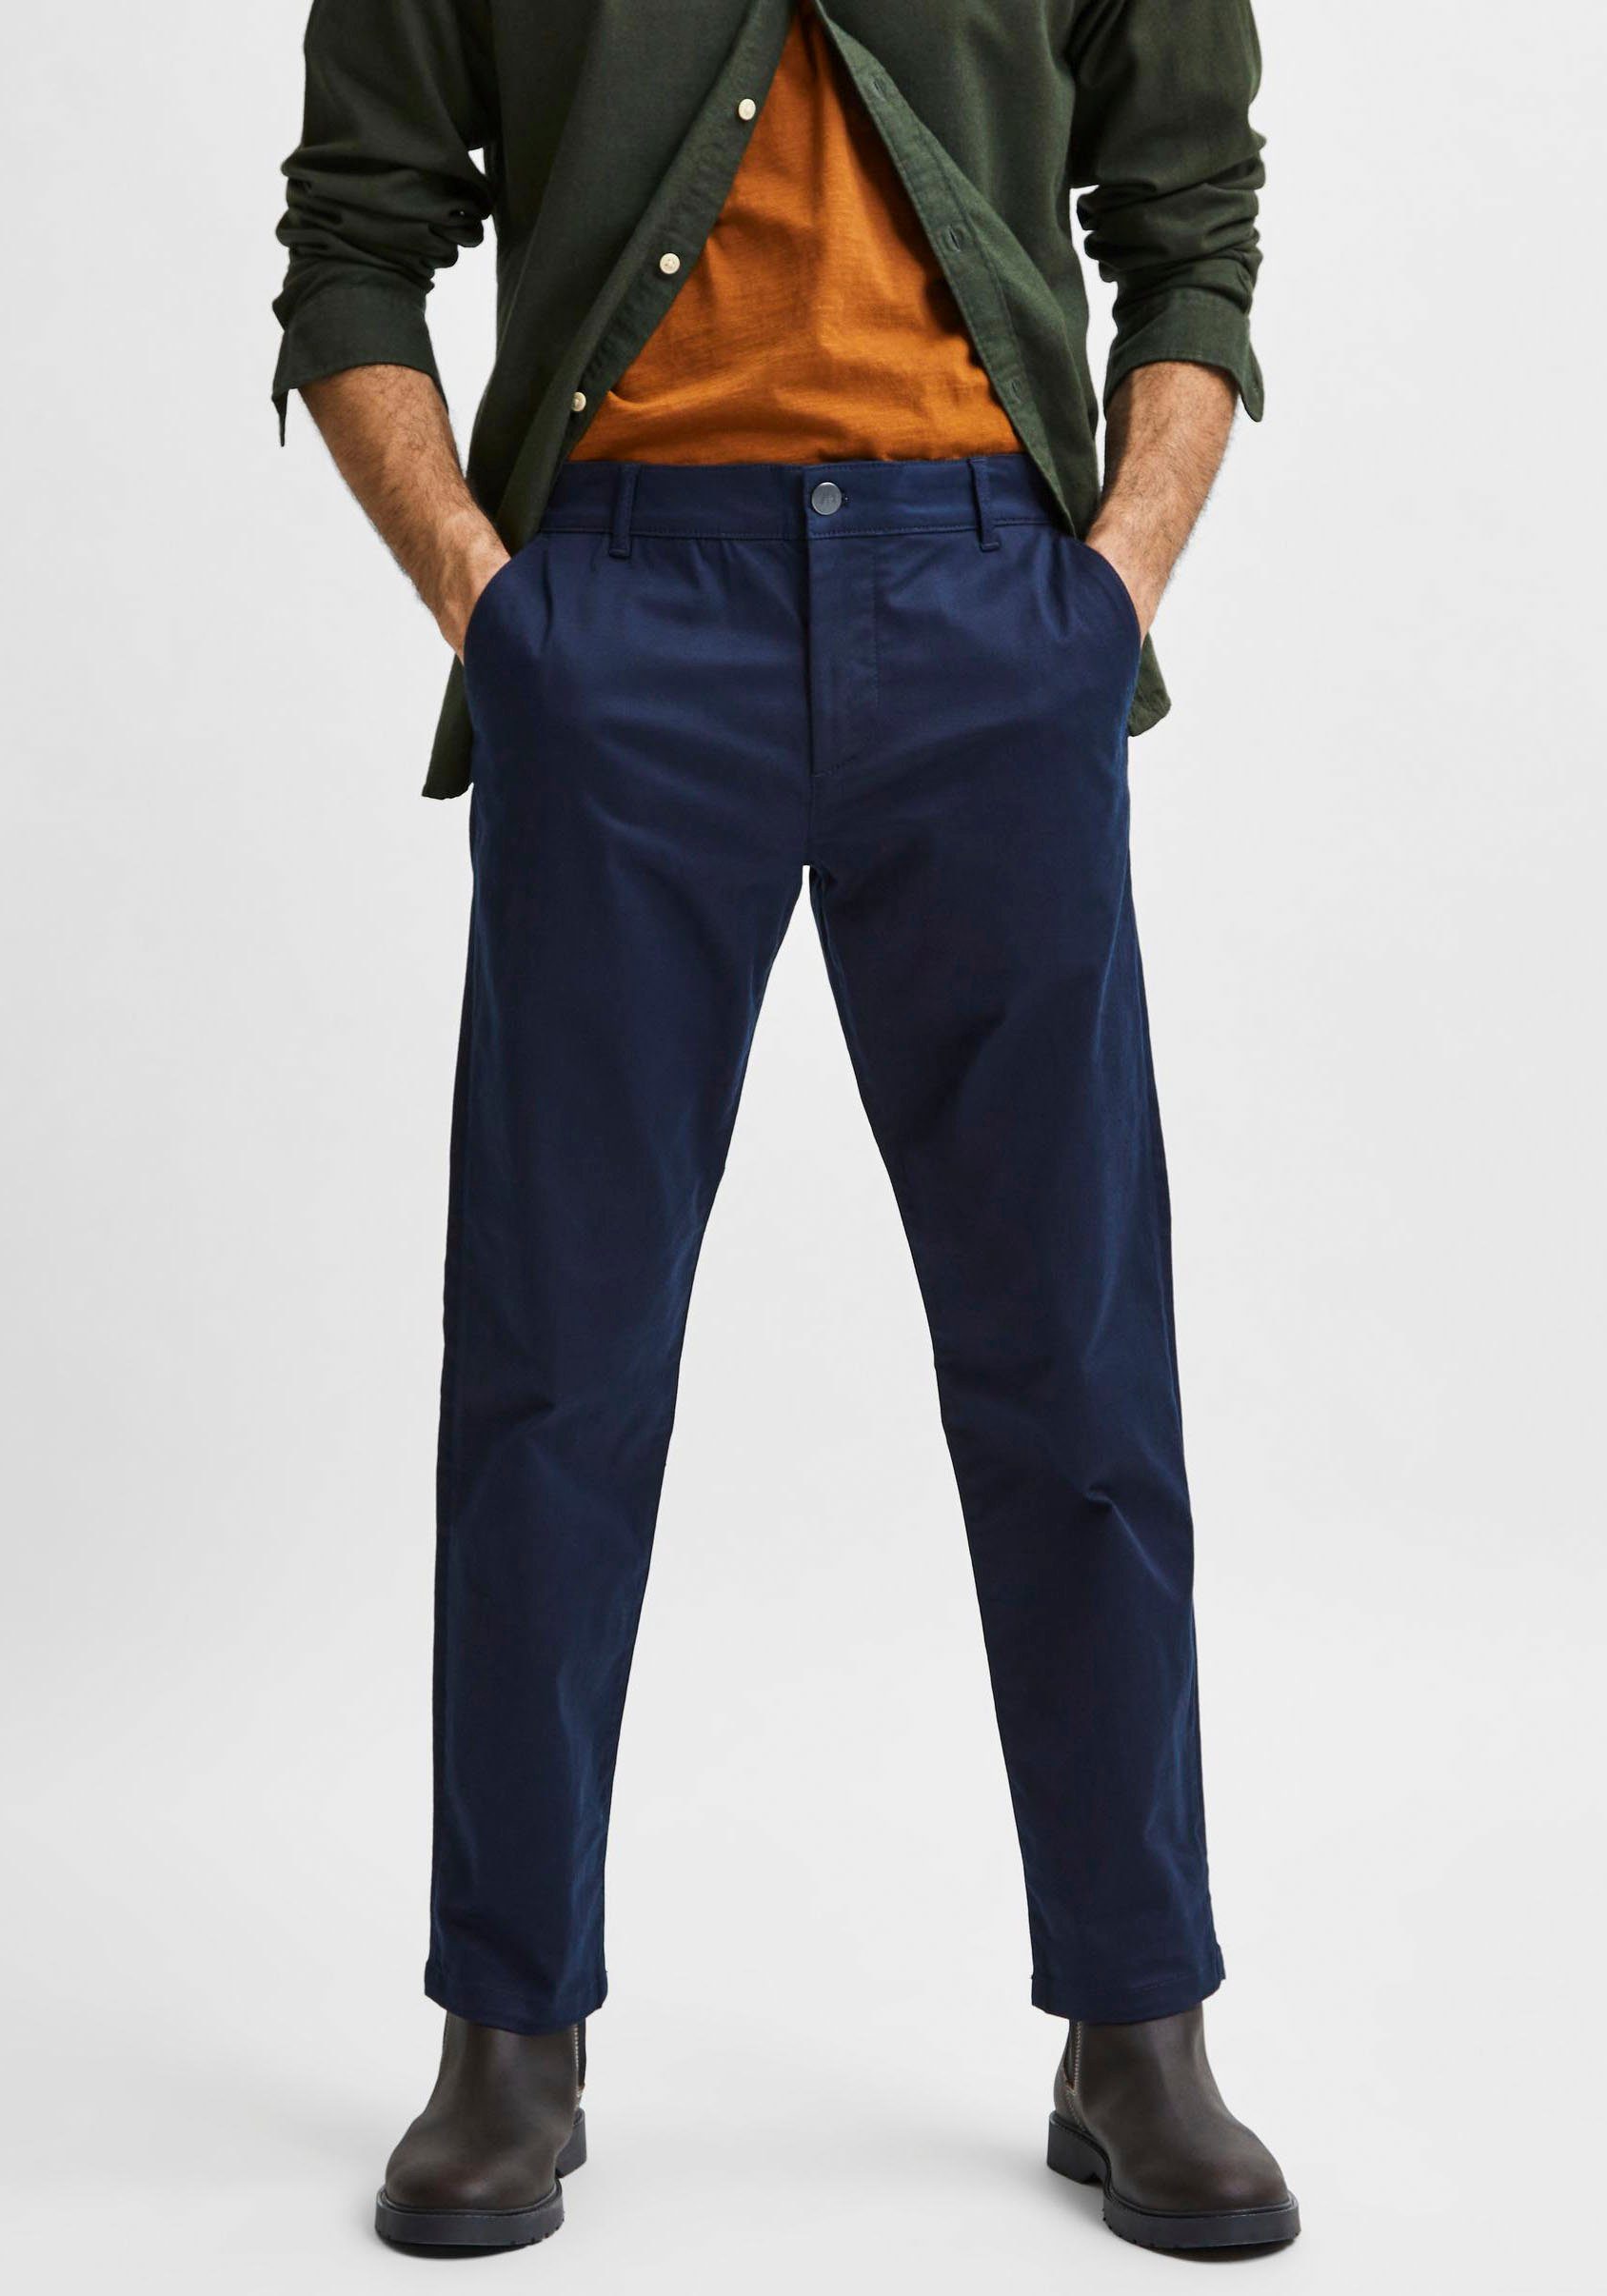 SE Chinohose Sapphire HOMME SELECTED Chino Dark